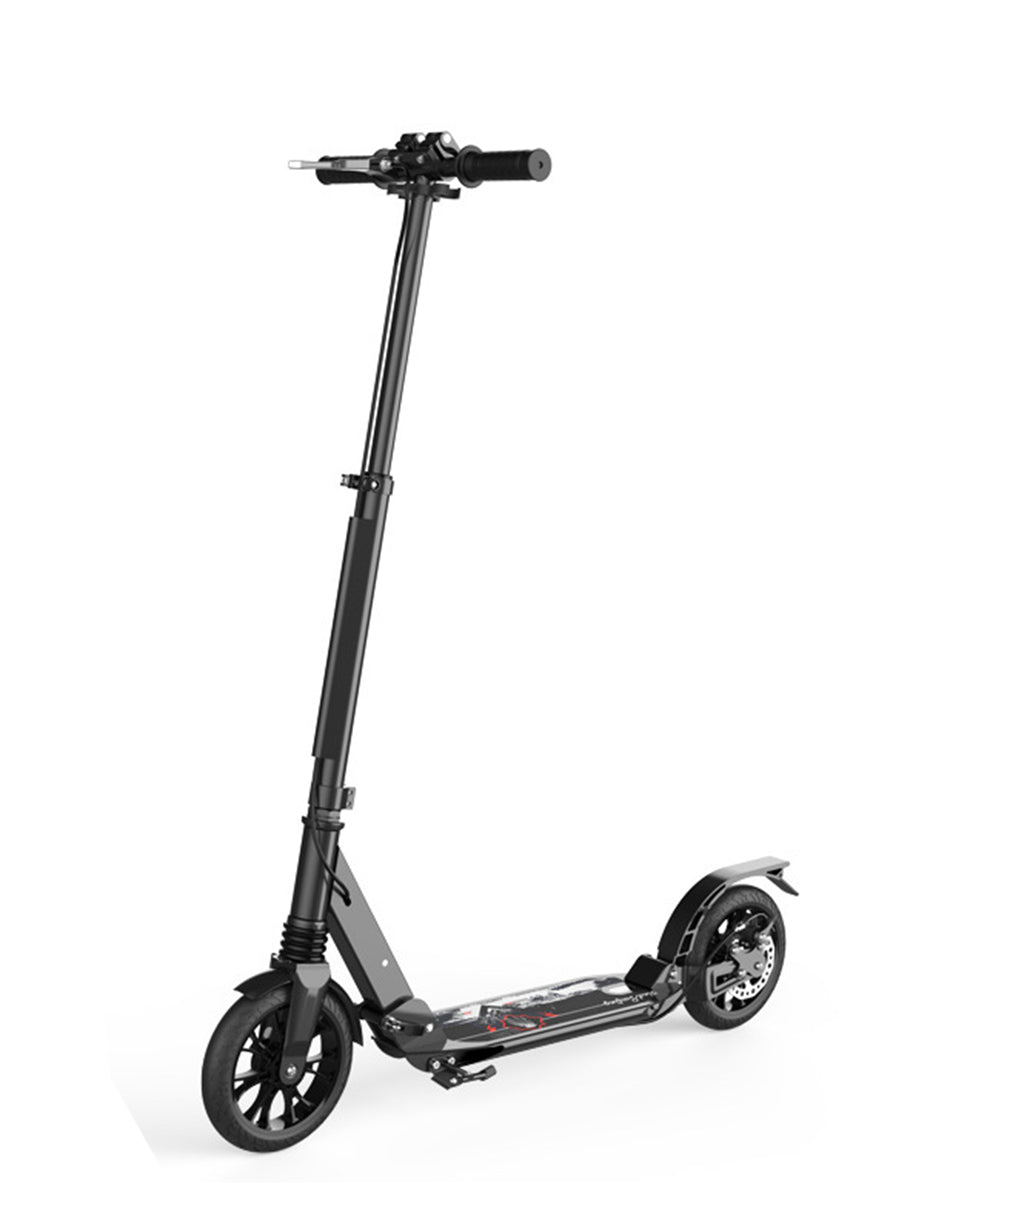 9X Adjustable Aluminium Kick Scooter Portable Ultra-Lightweight for Adult Youth